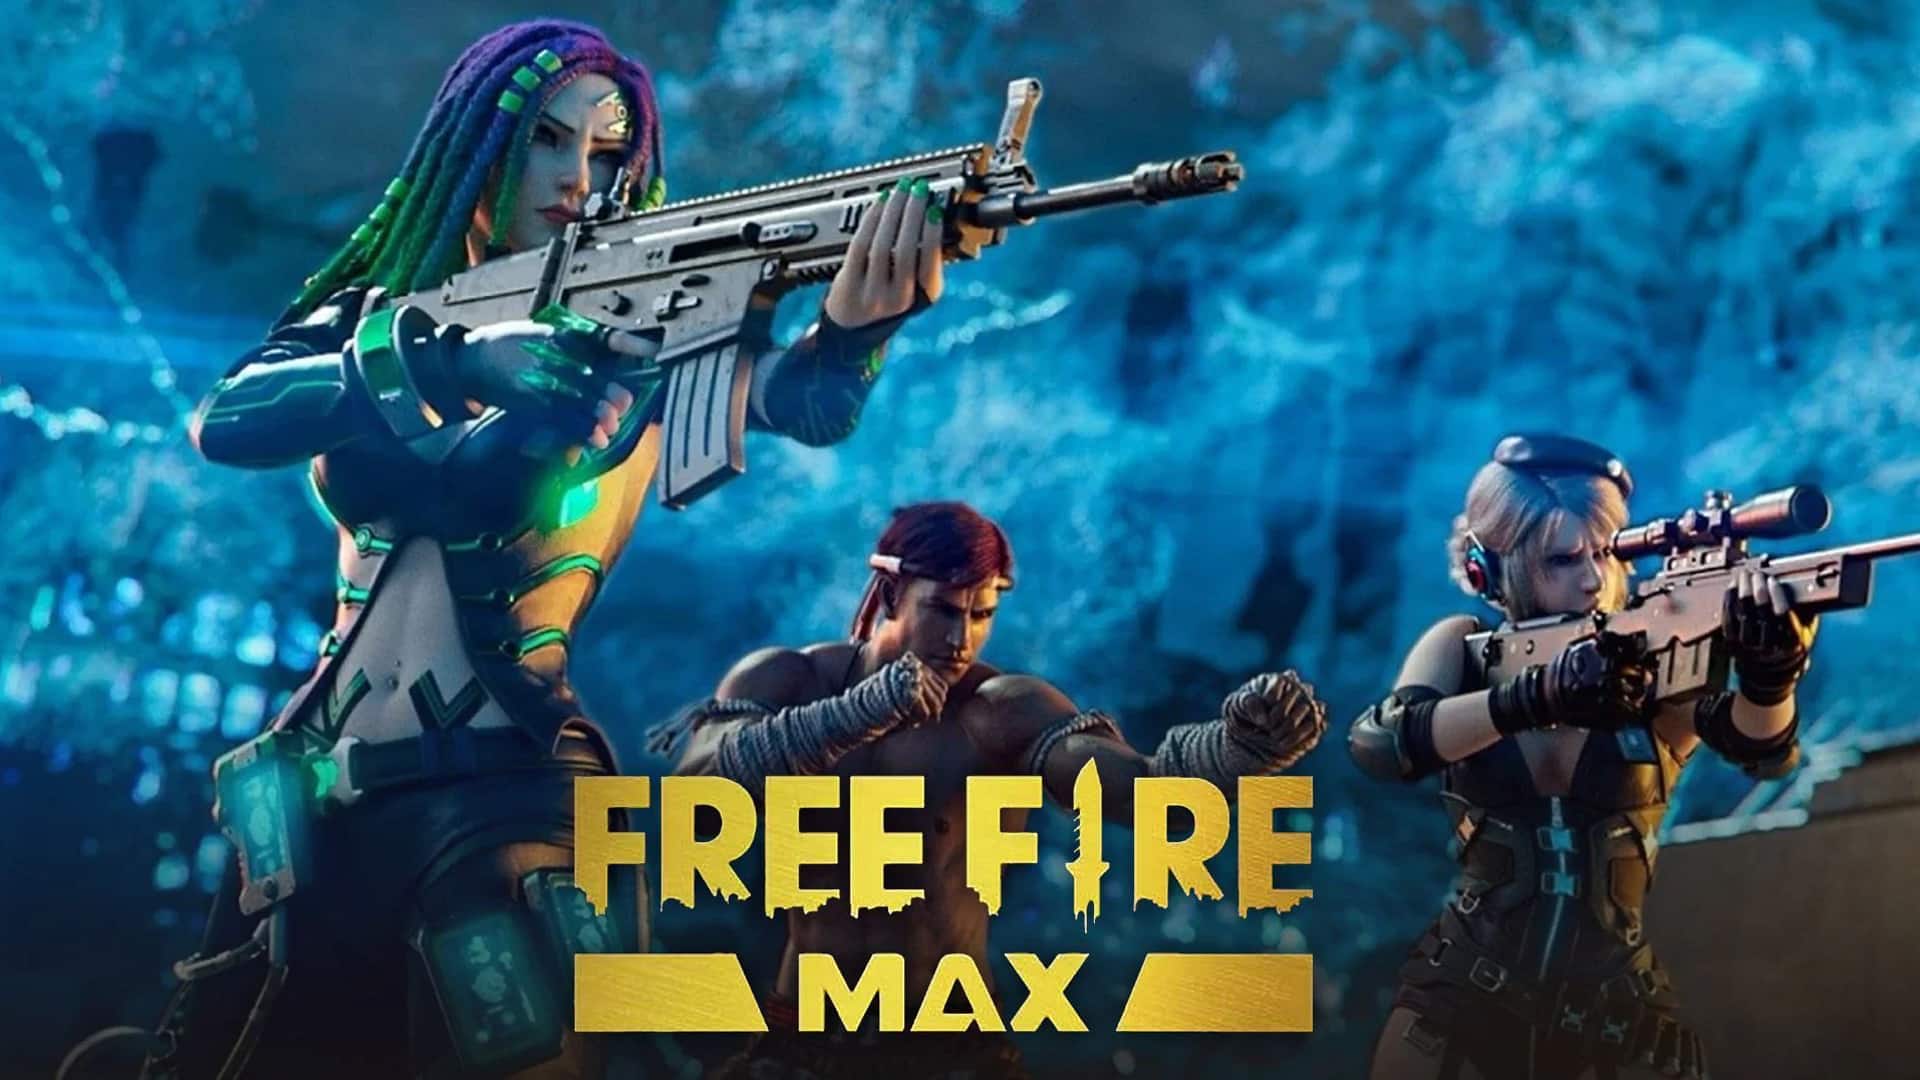 Garena Free Fire MAX redeem codes released for November 21